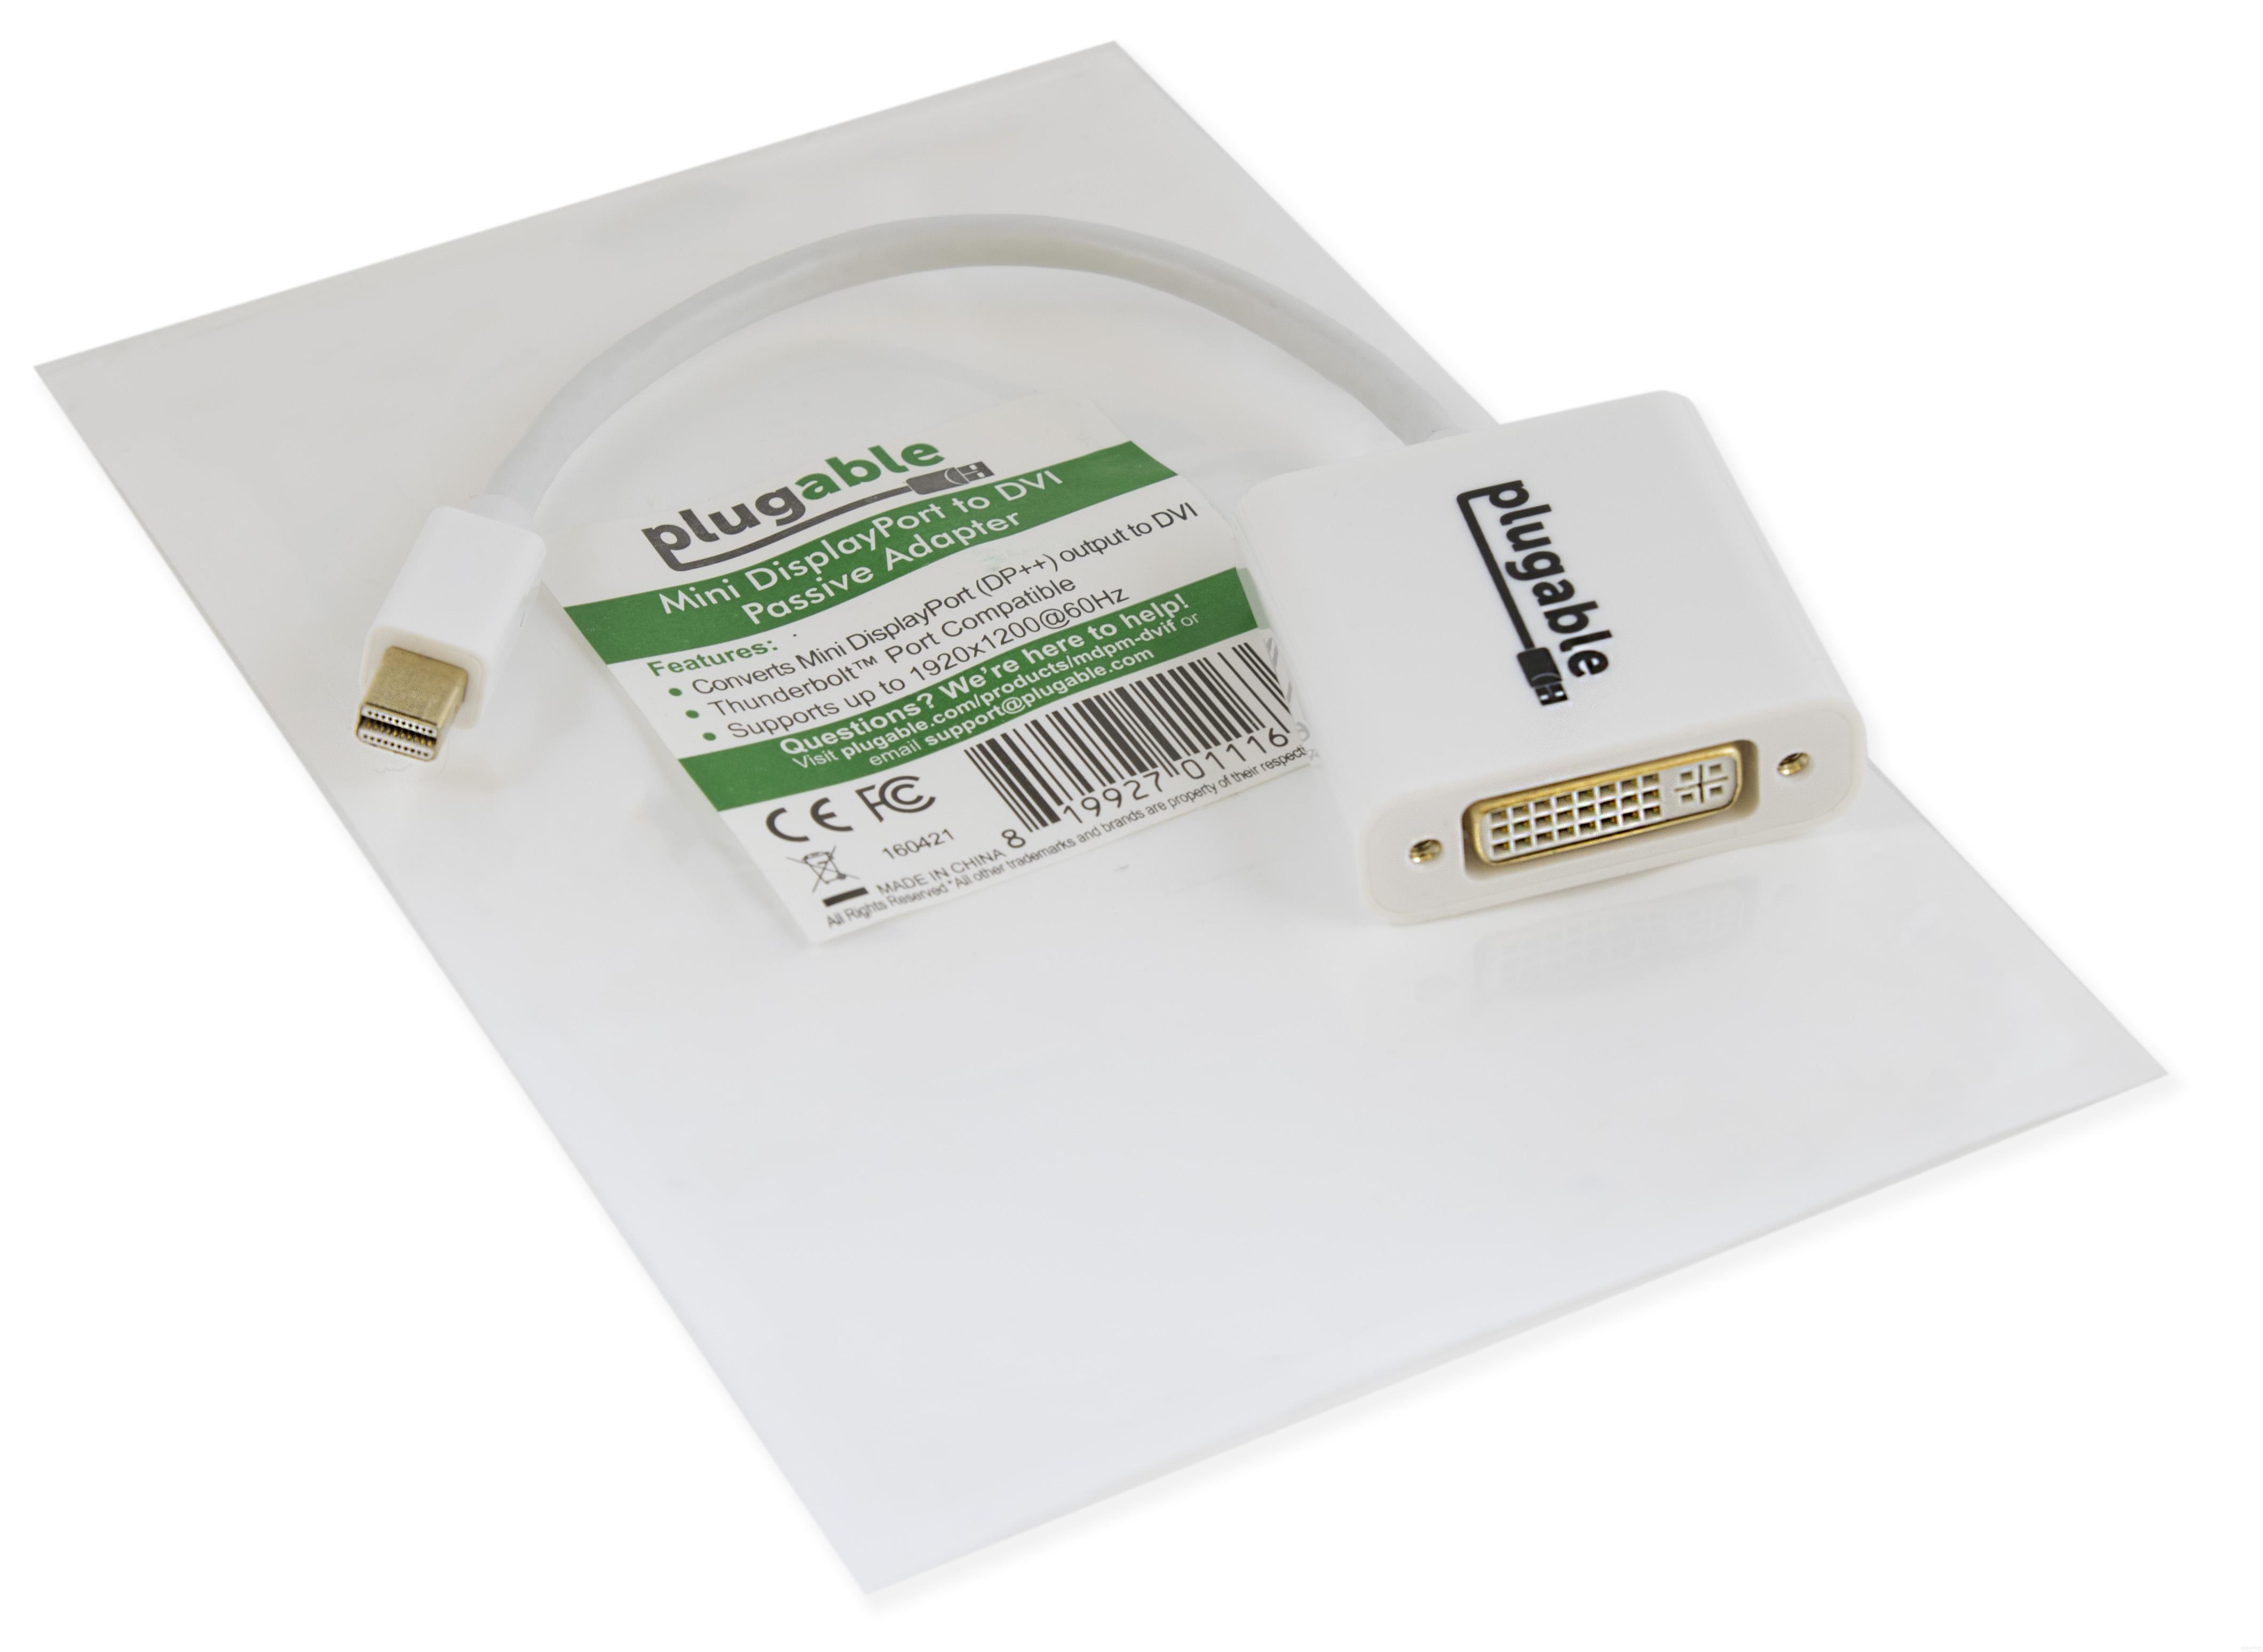 Plugable Mini DisplayPort (Thunderbolt 2) to DVI Adapter (Supports Mac, Windows, Linux Systems and Displays up to 1920x1200@60Hz, Passive). - image 3 of 4